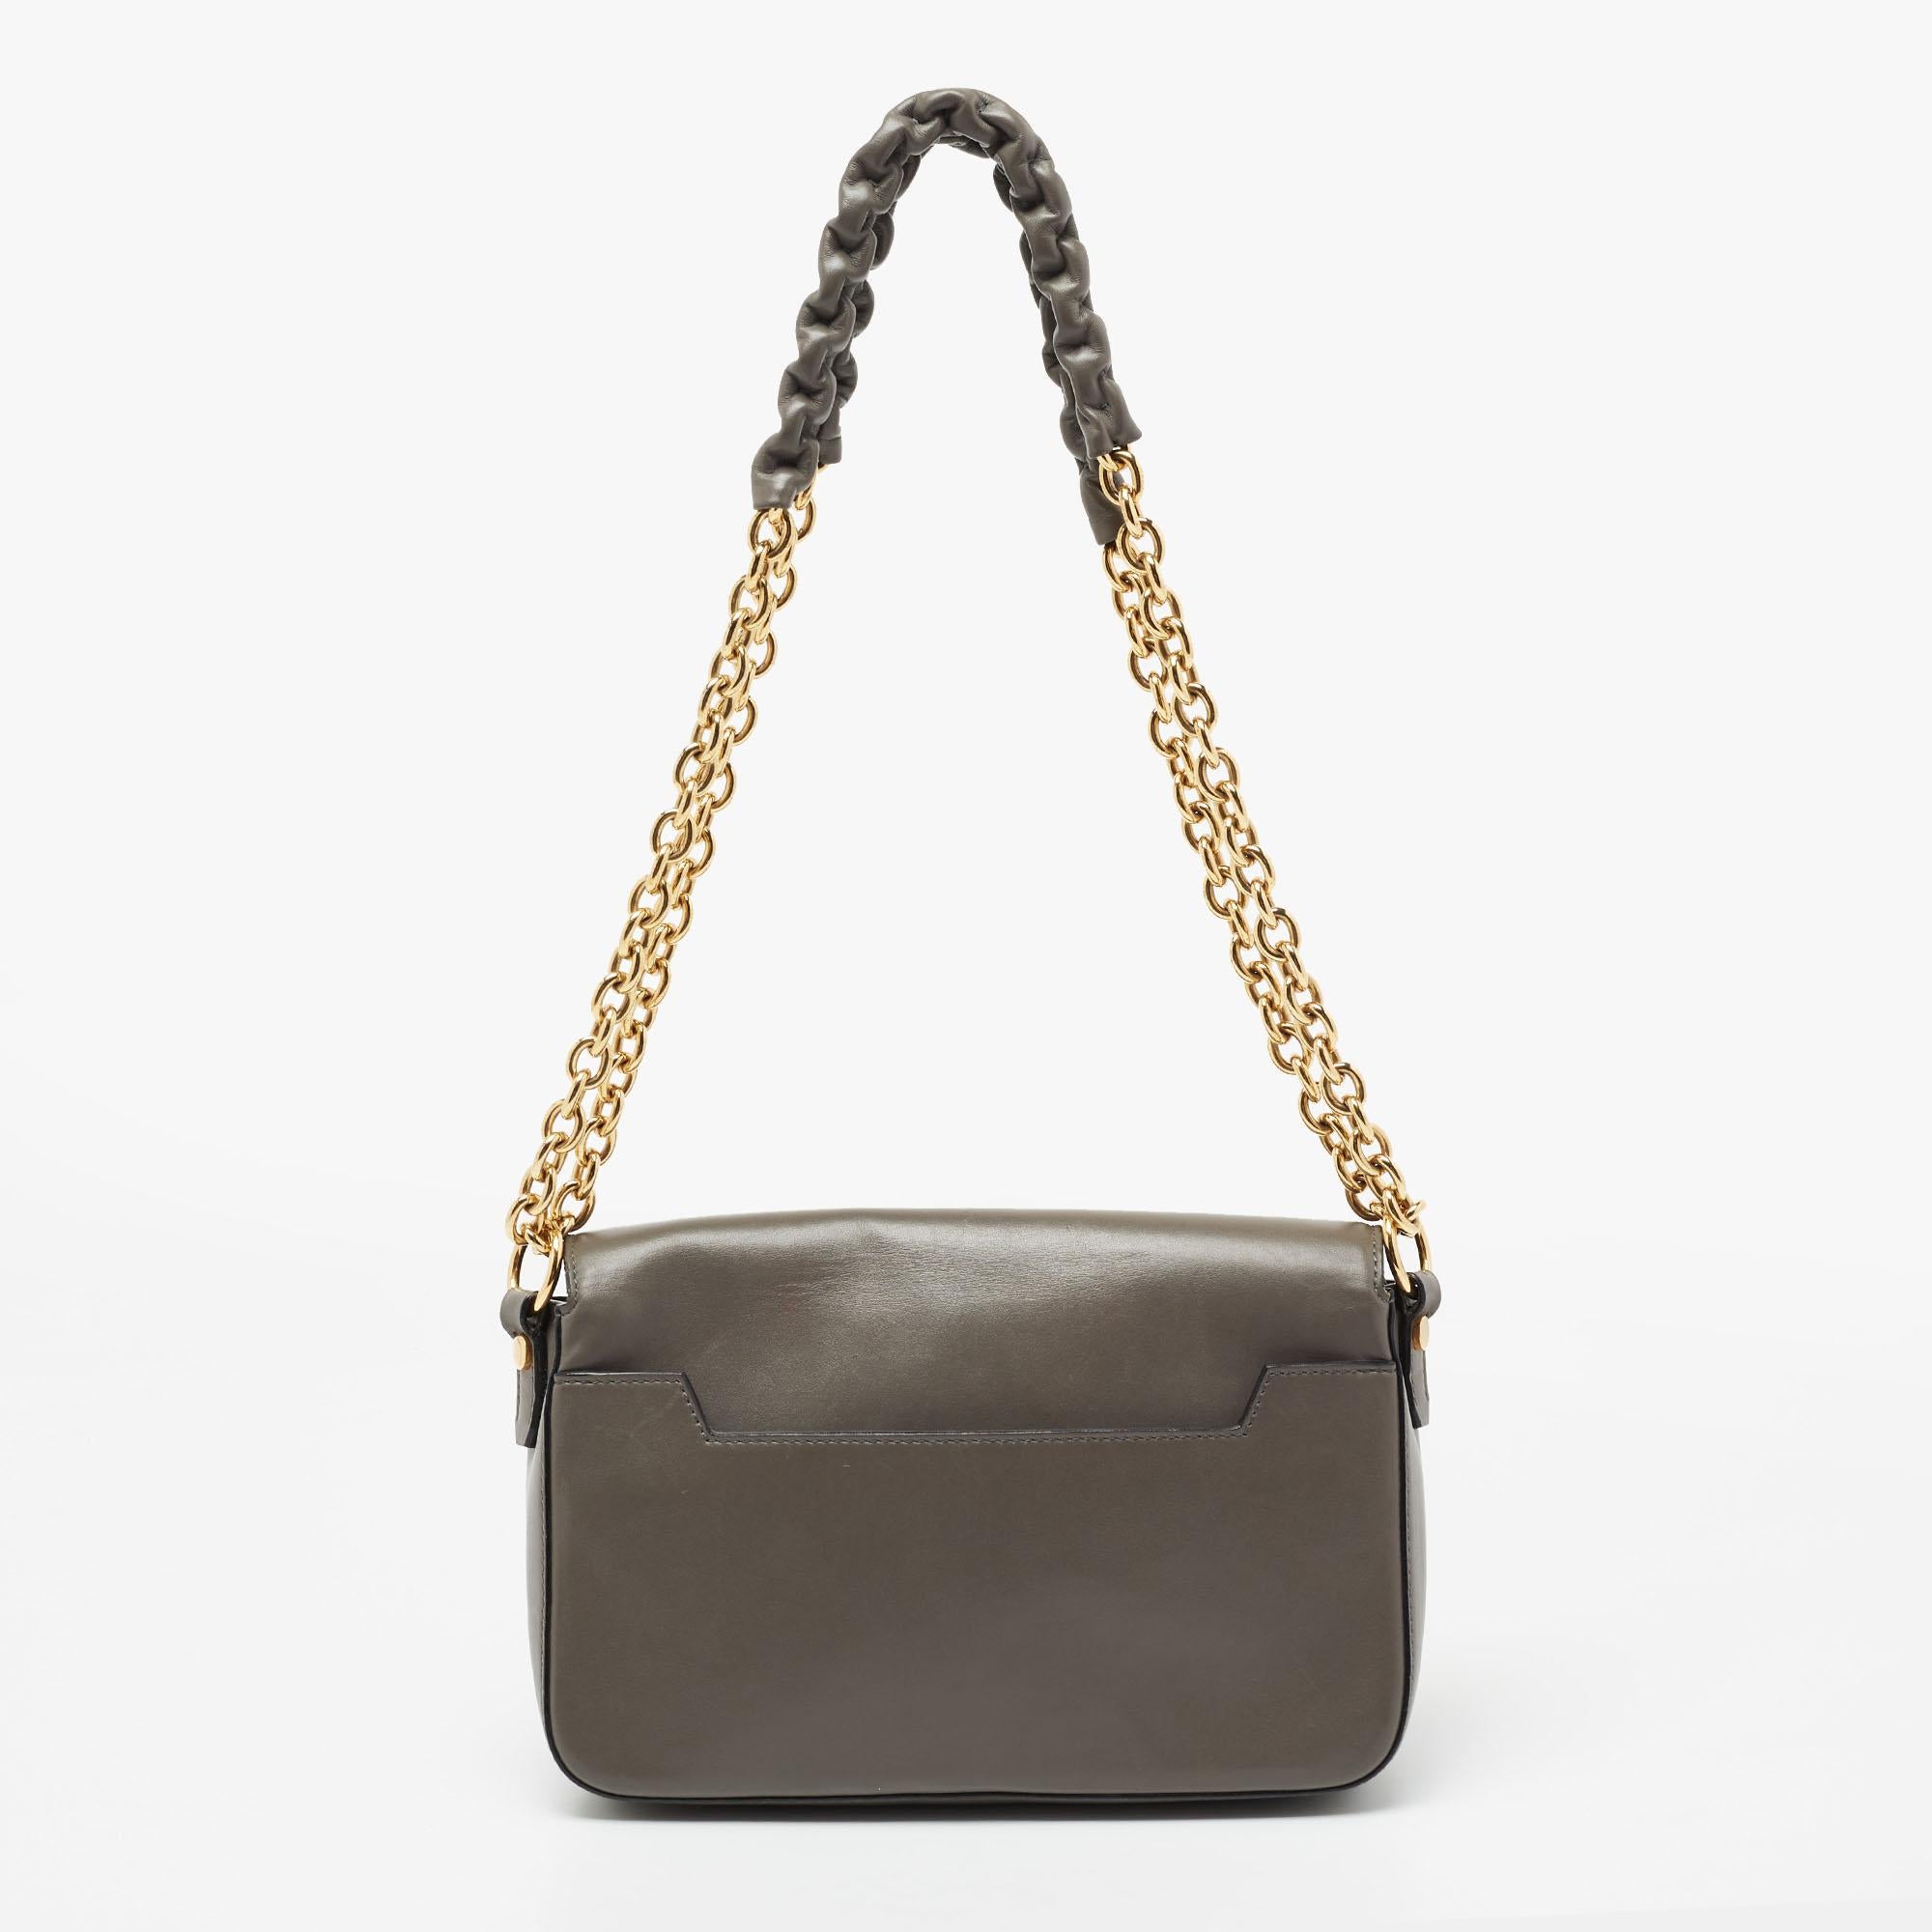 With its unique flair and edgy appeal, this Natalia bag from Tom Ford will end all your fashion woes. It is crafted from leather and the oversized branded twist-turn lock on the front makes it striking. Lined with Alcantara, it will keep your